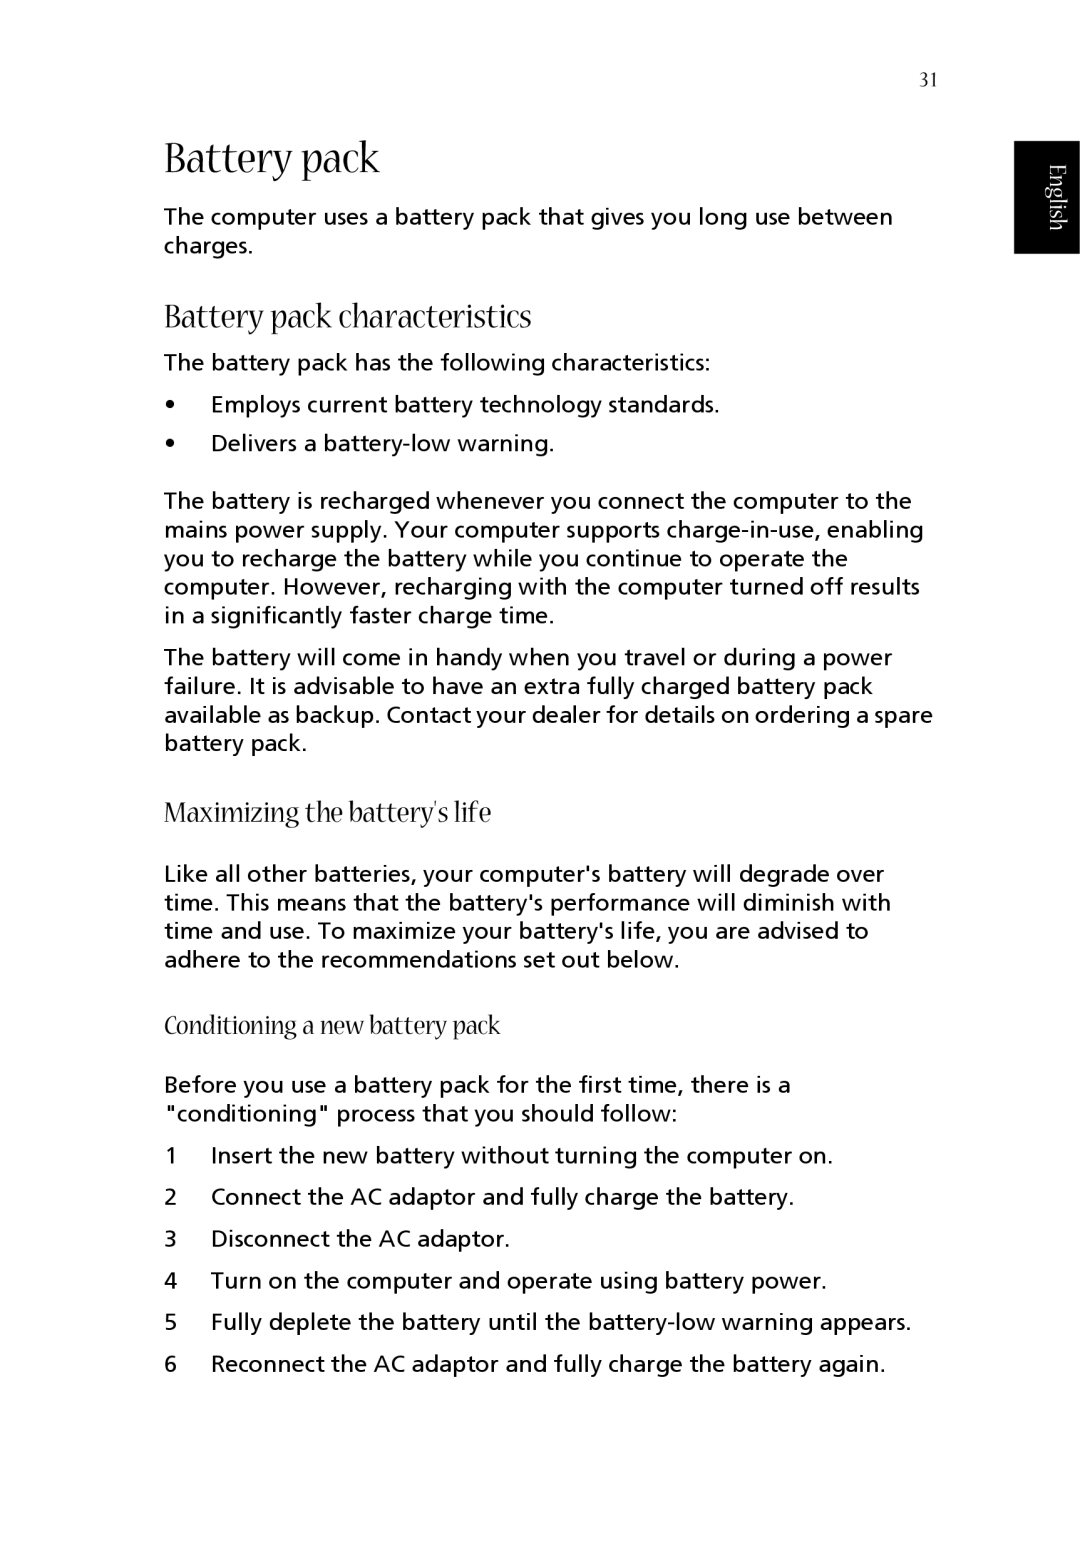 Acer 1360 manual Battery pack characteristics, Maximizing the batterys life, Conditioning a new battery pack, English 